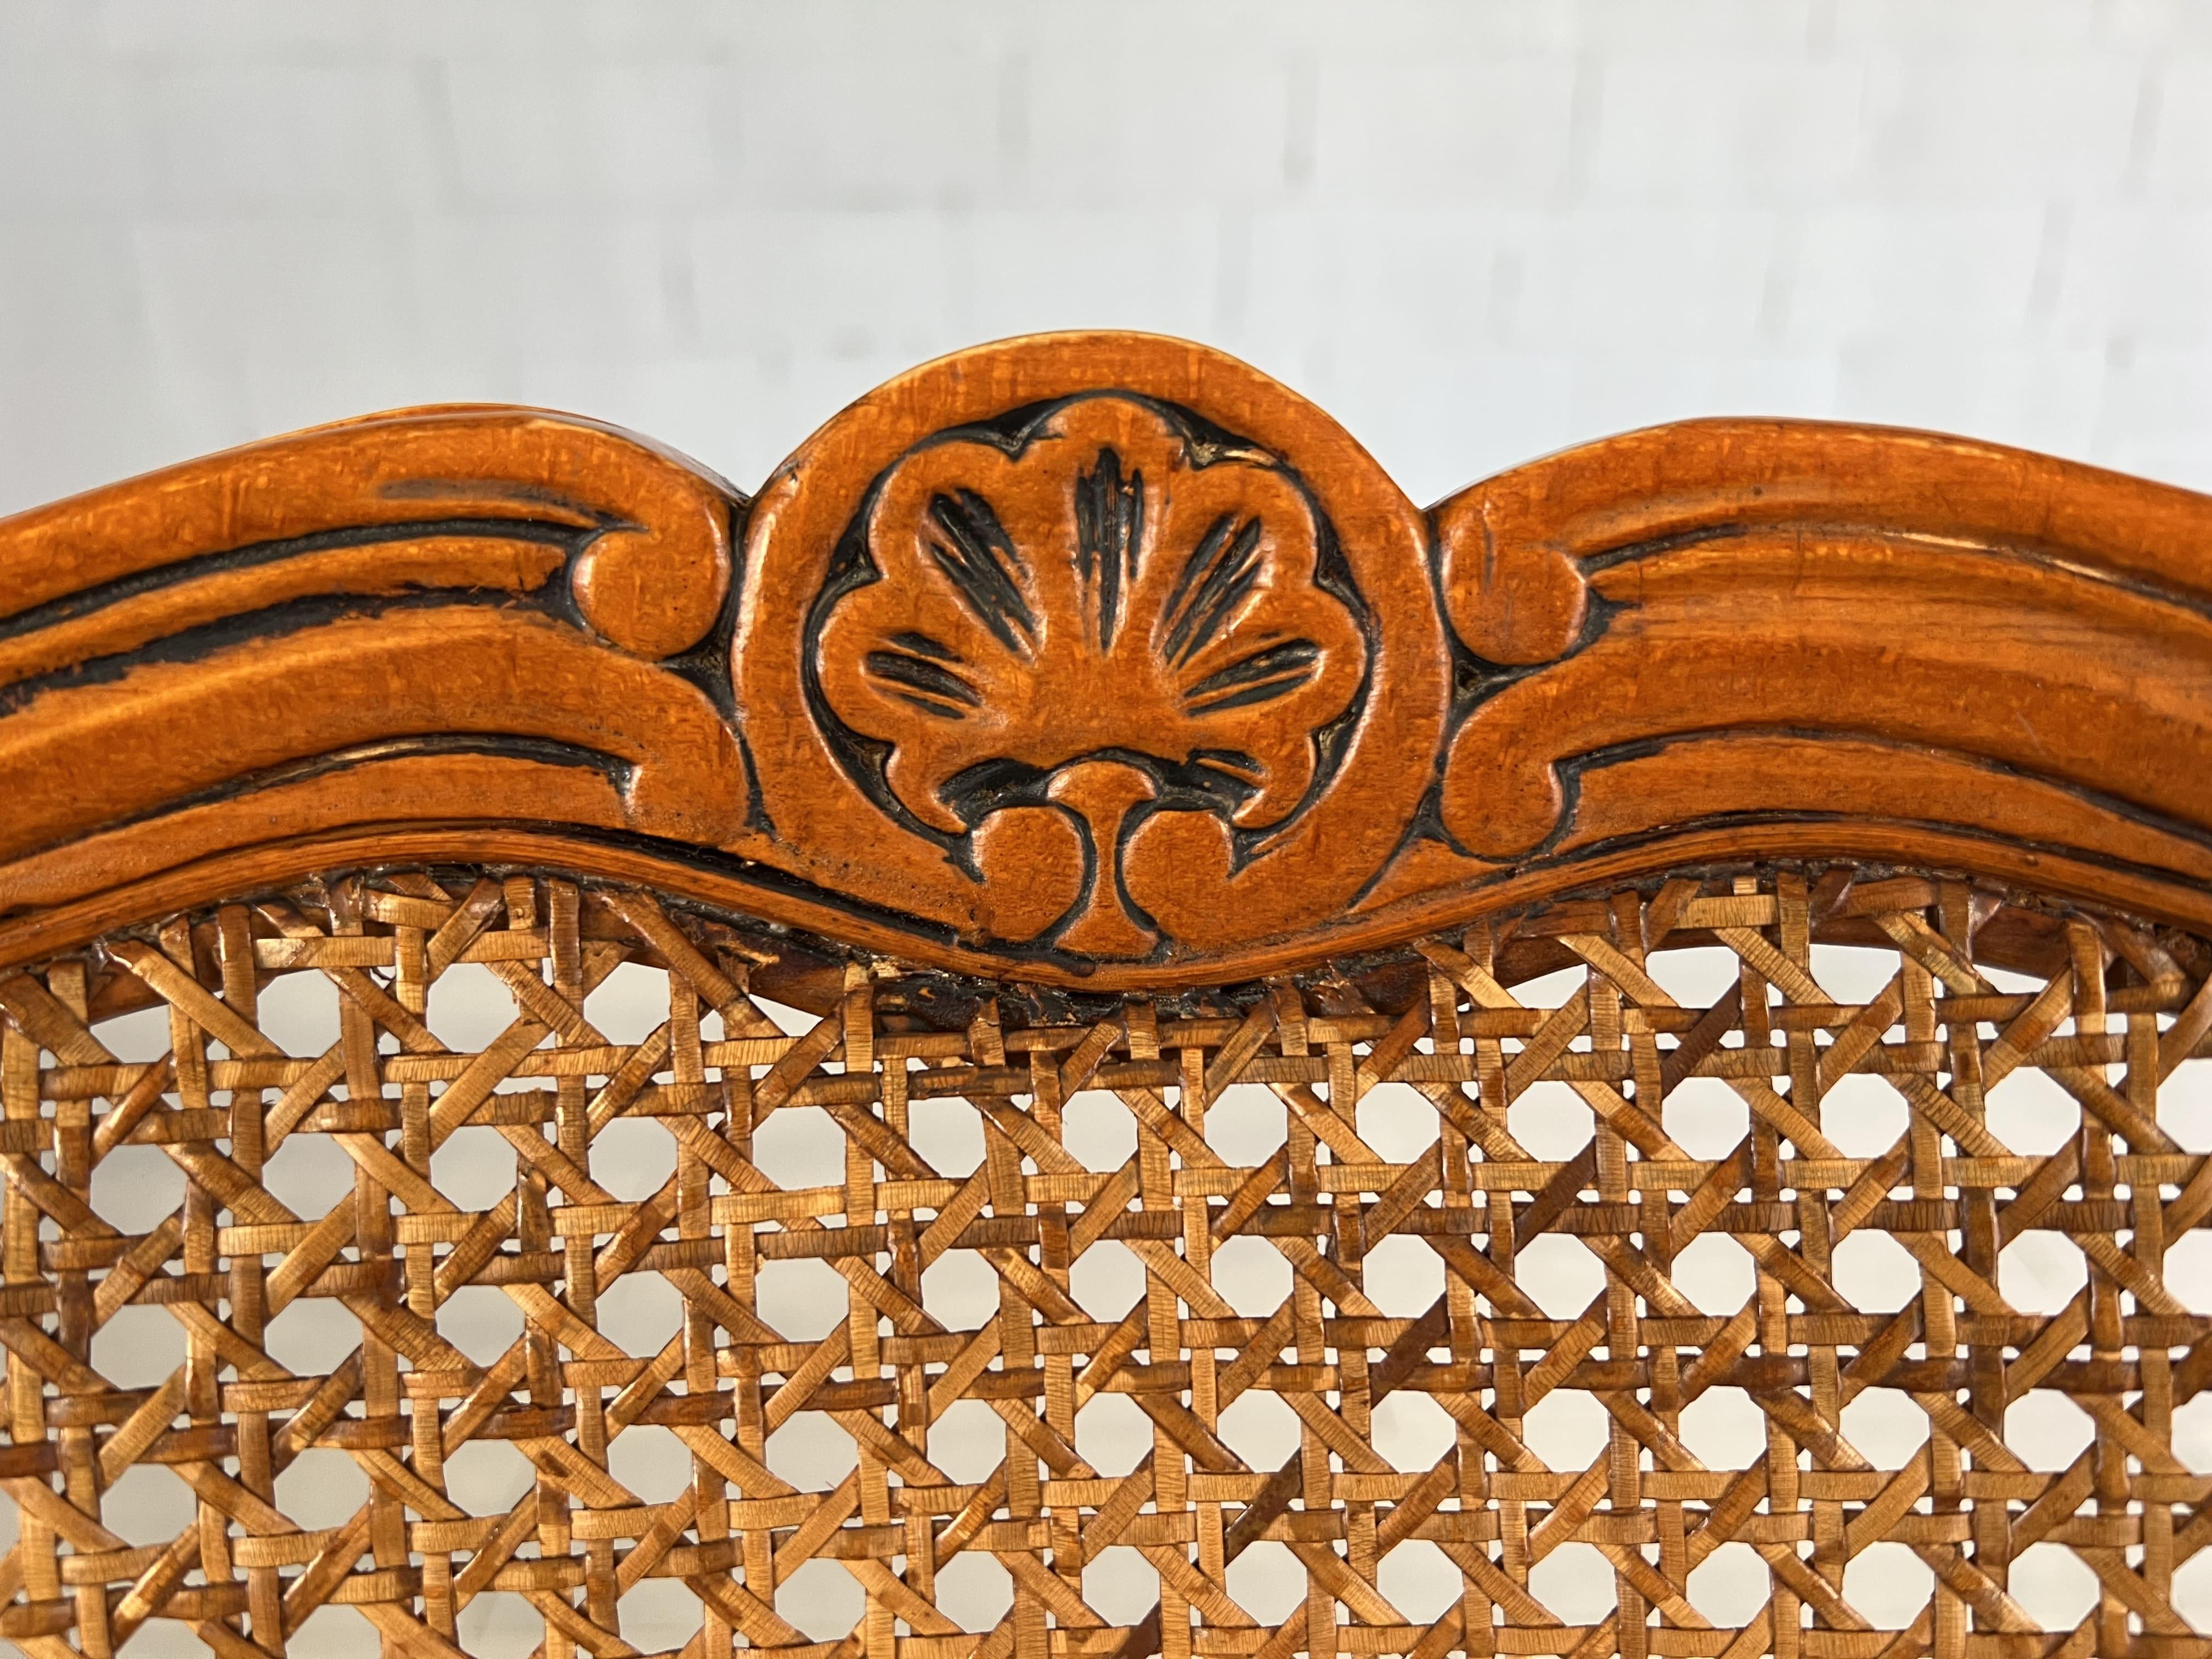 french provincial cane back dining chairs